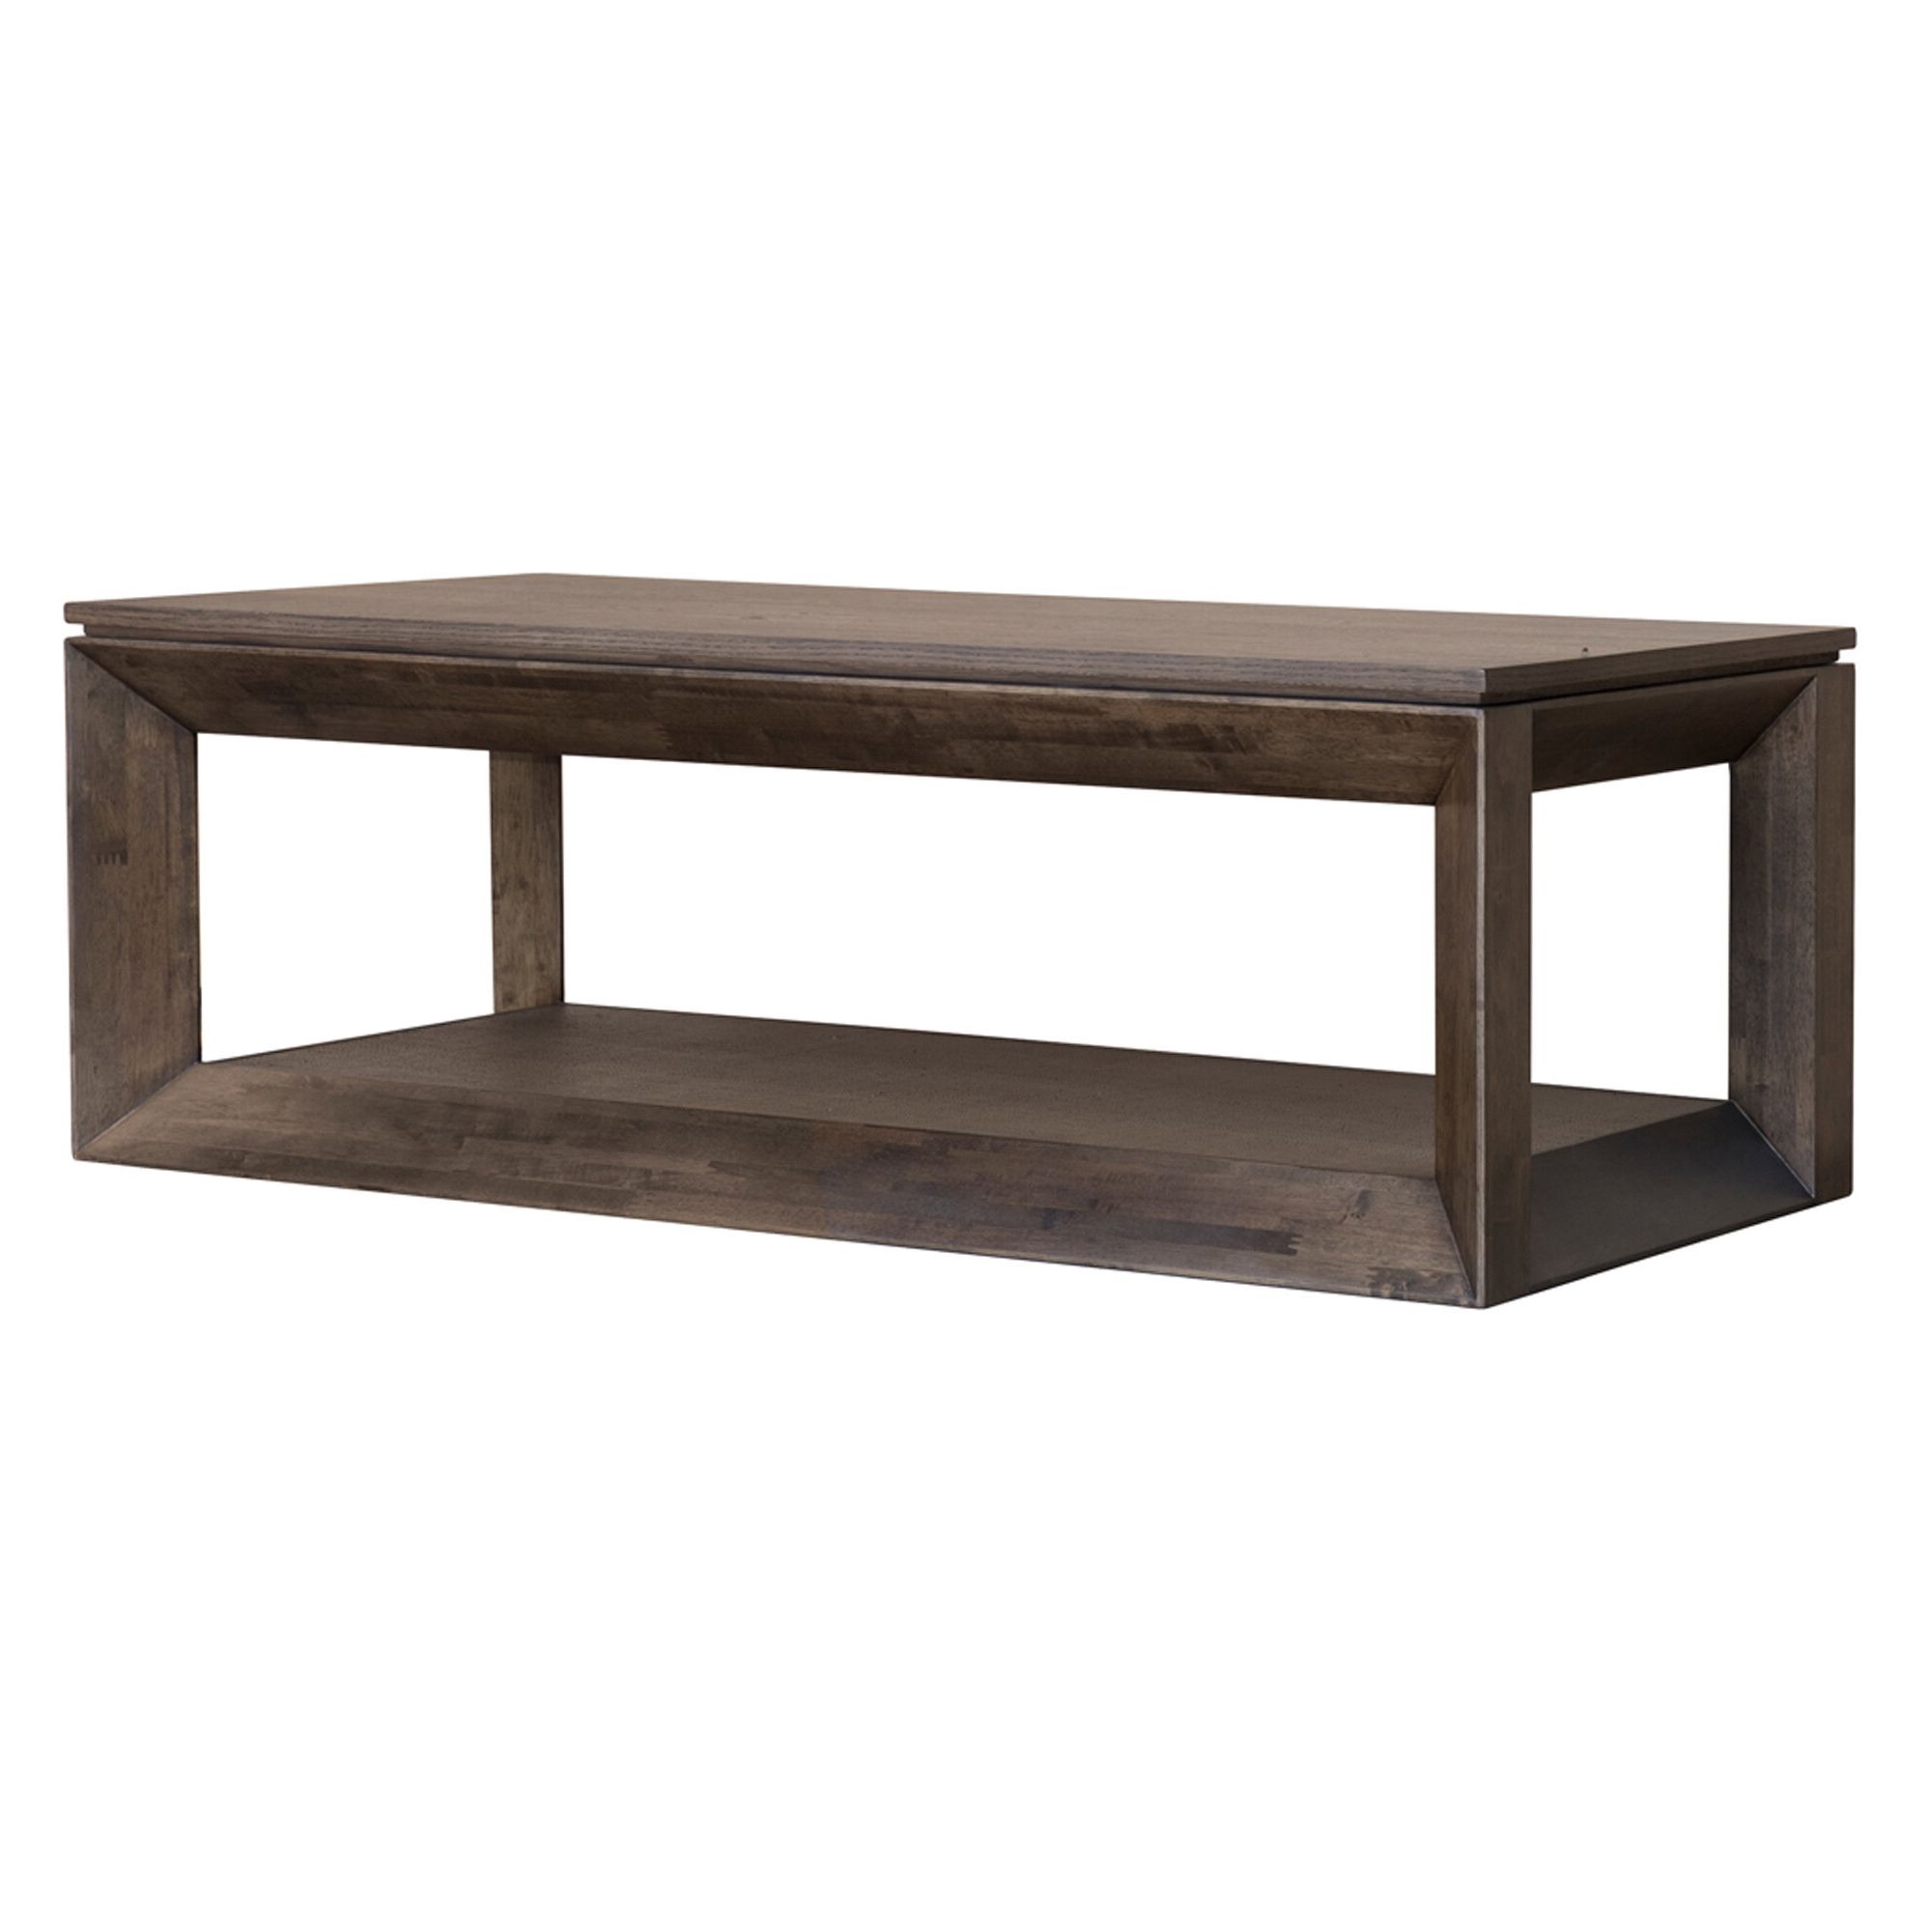 Ricka Coffee Table With 2018 Transitional 8 Seating Rectangular Helsinki Dining Tables (View 13 of 30)